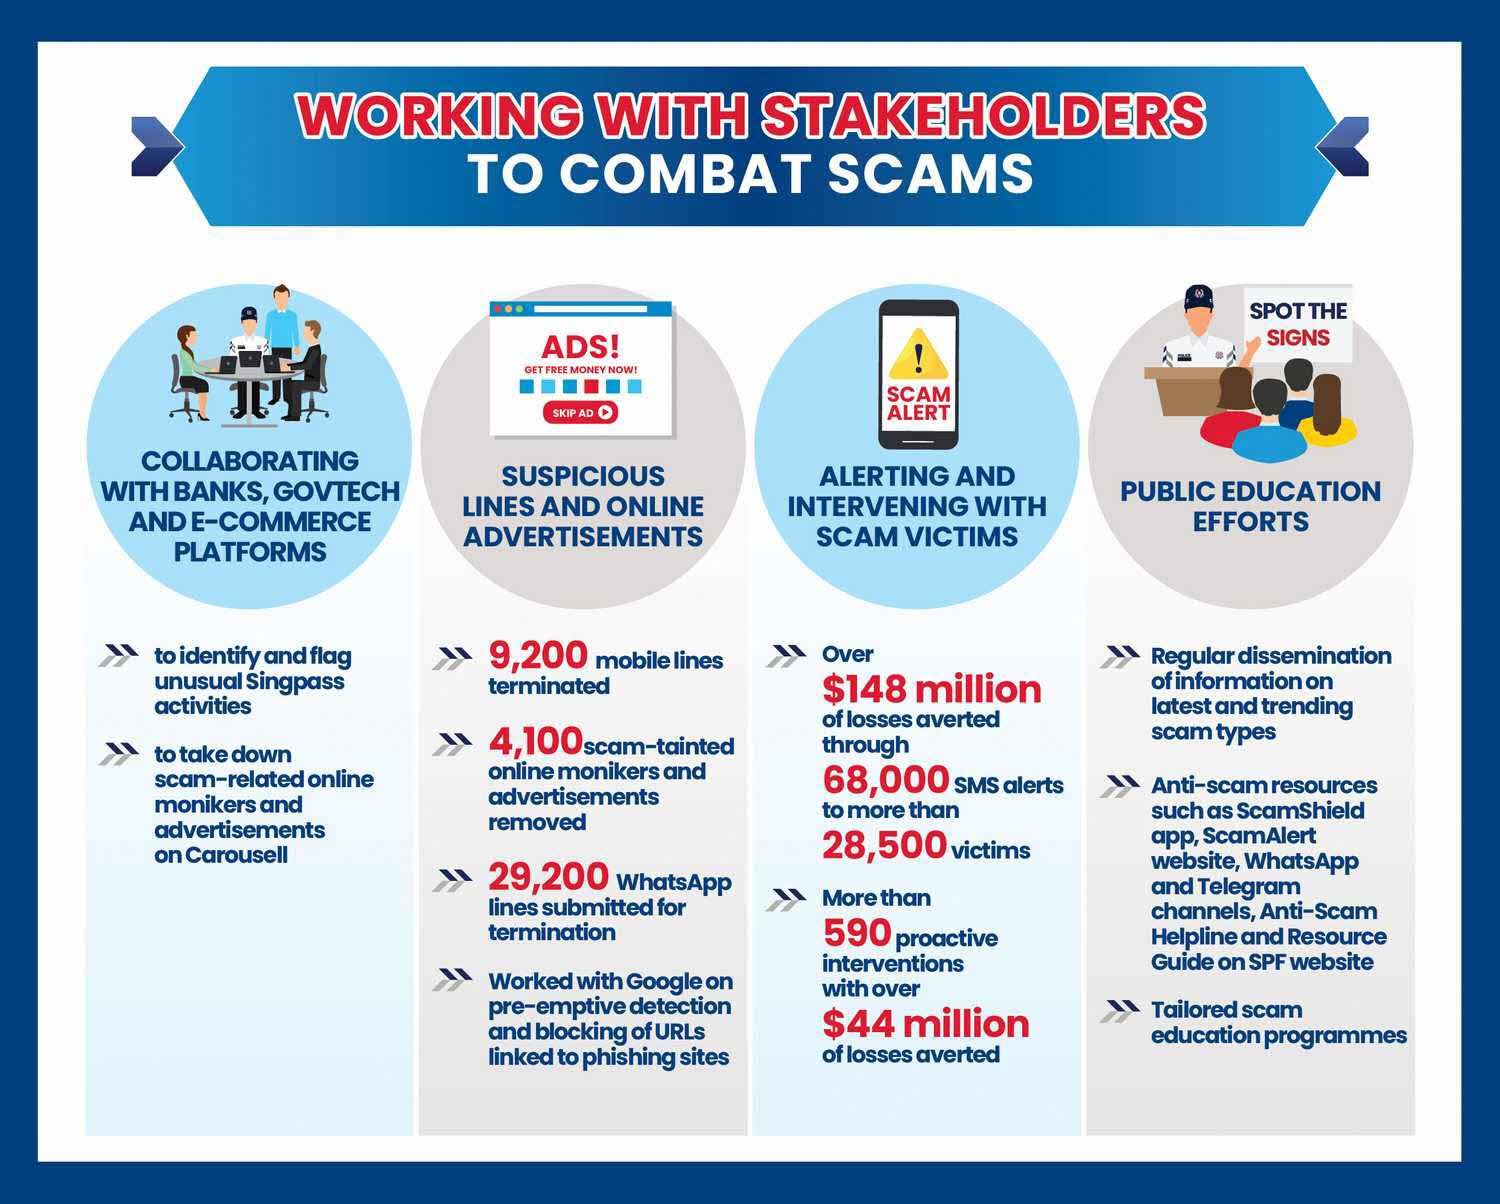 Working with stakeholders to combat scams